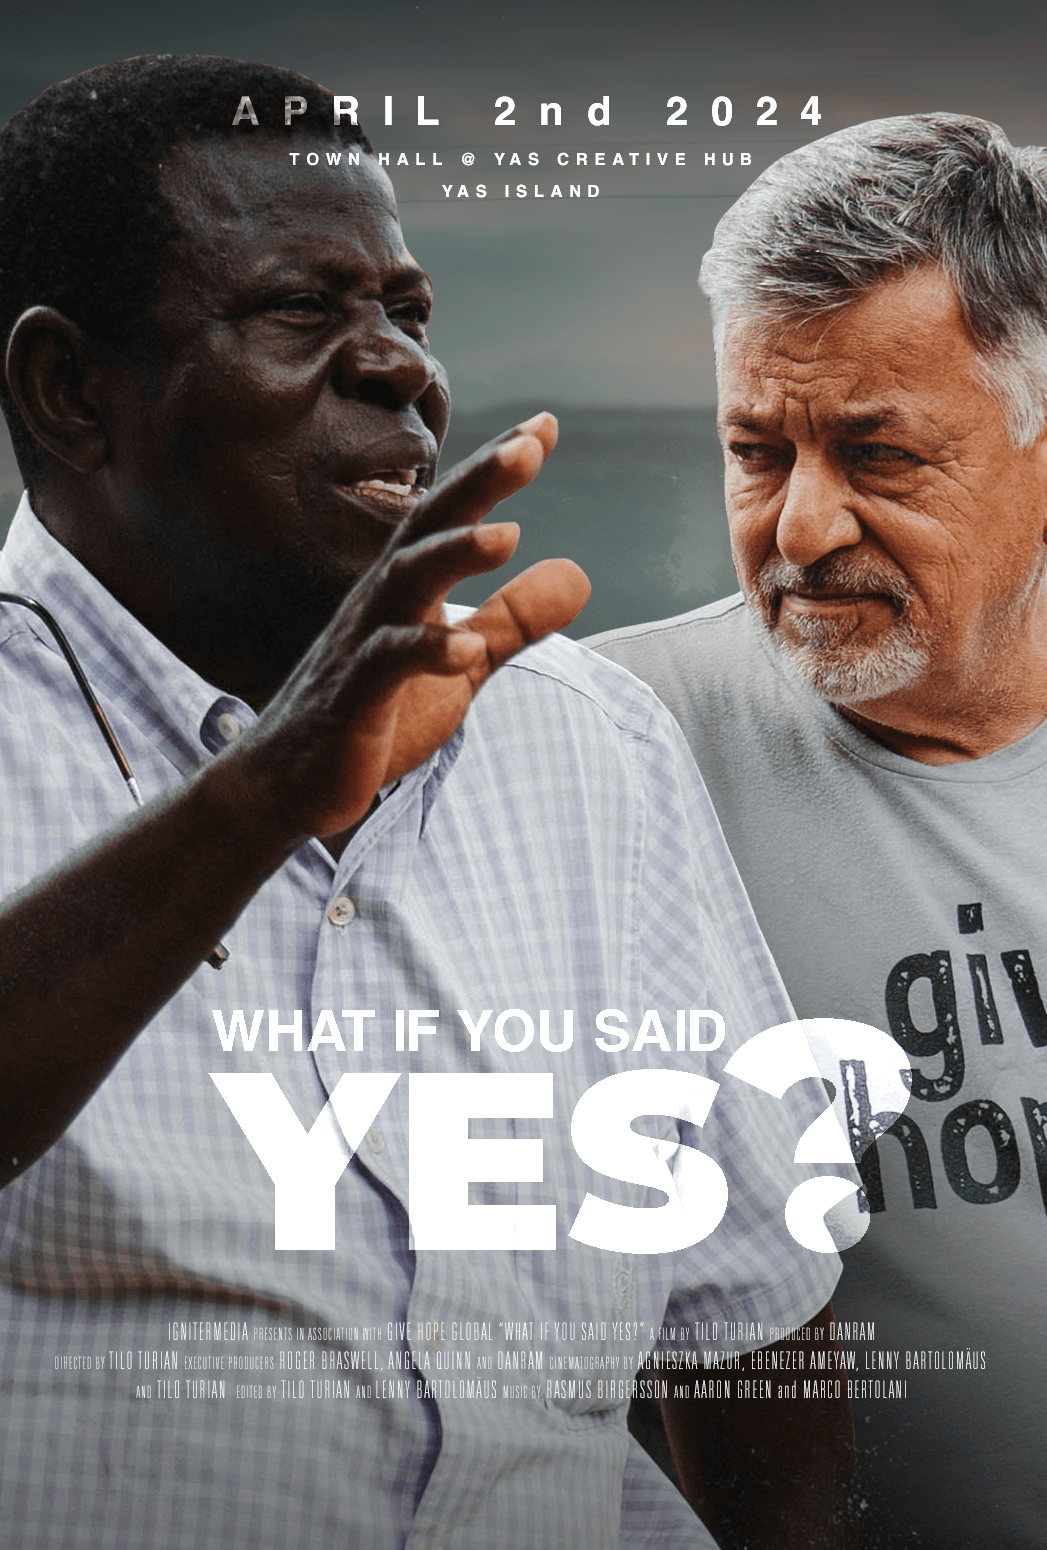 What if You said YES!  Documentary Premiere